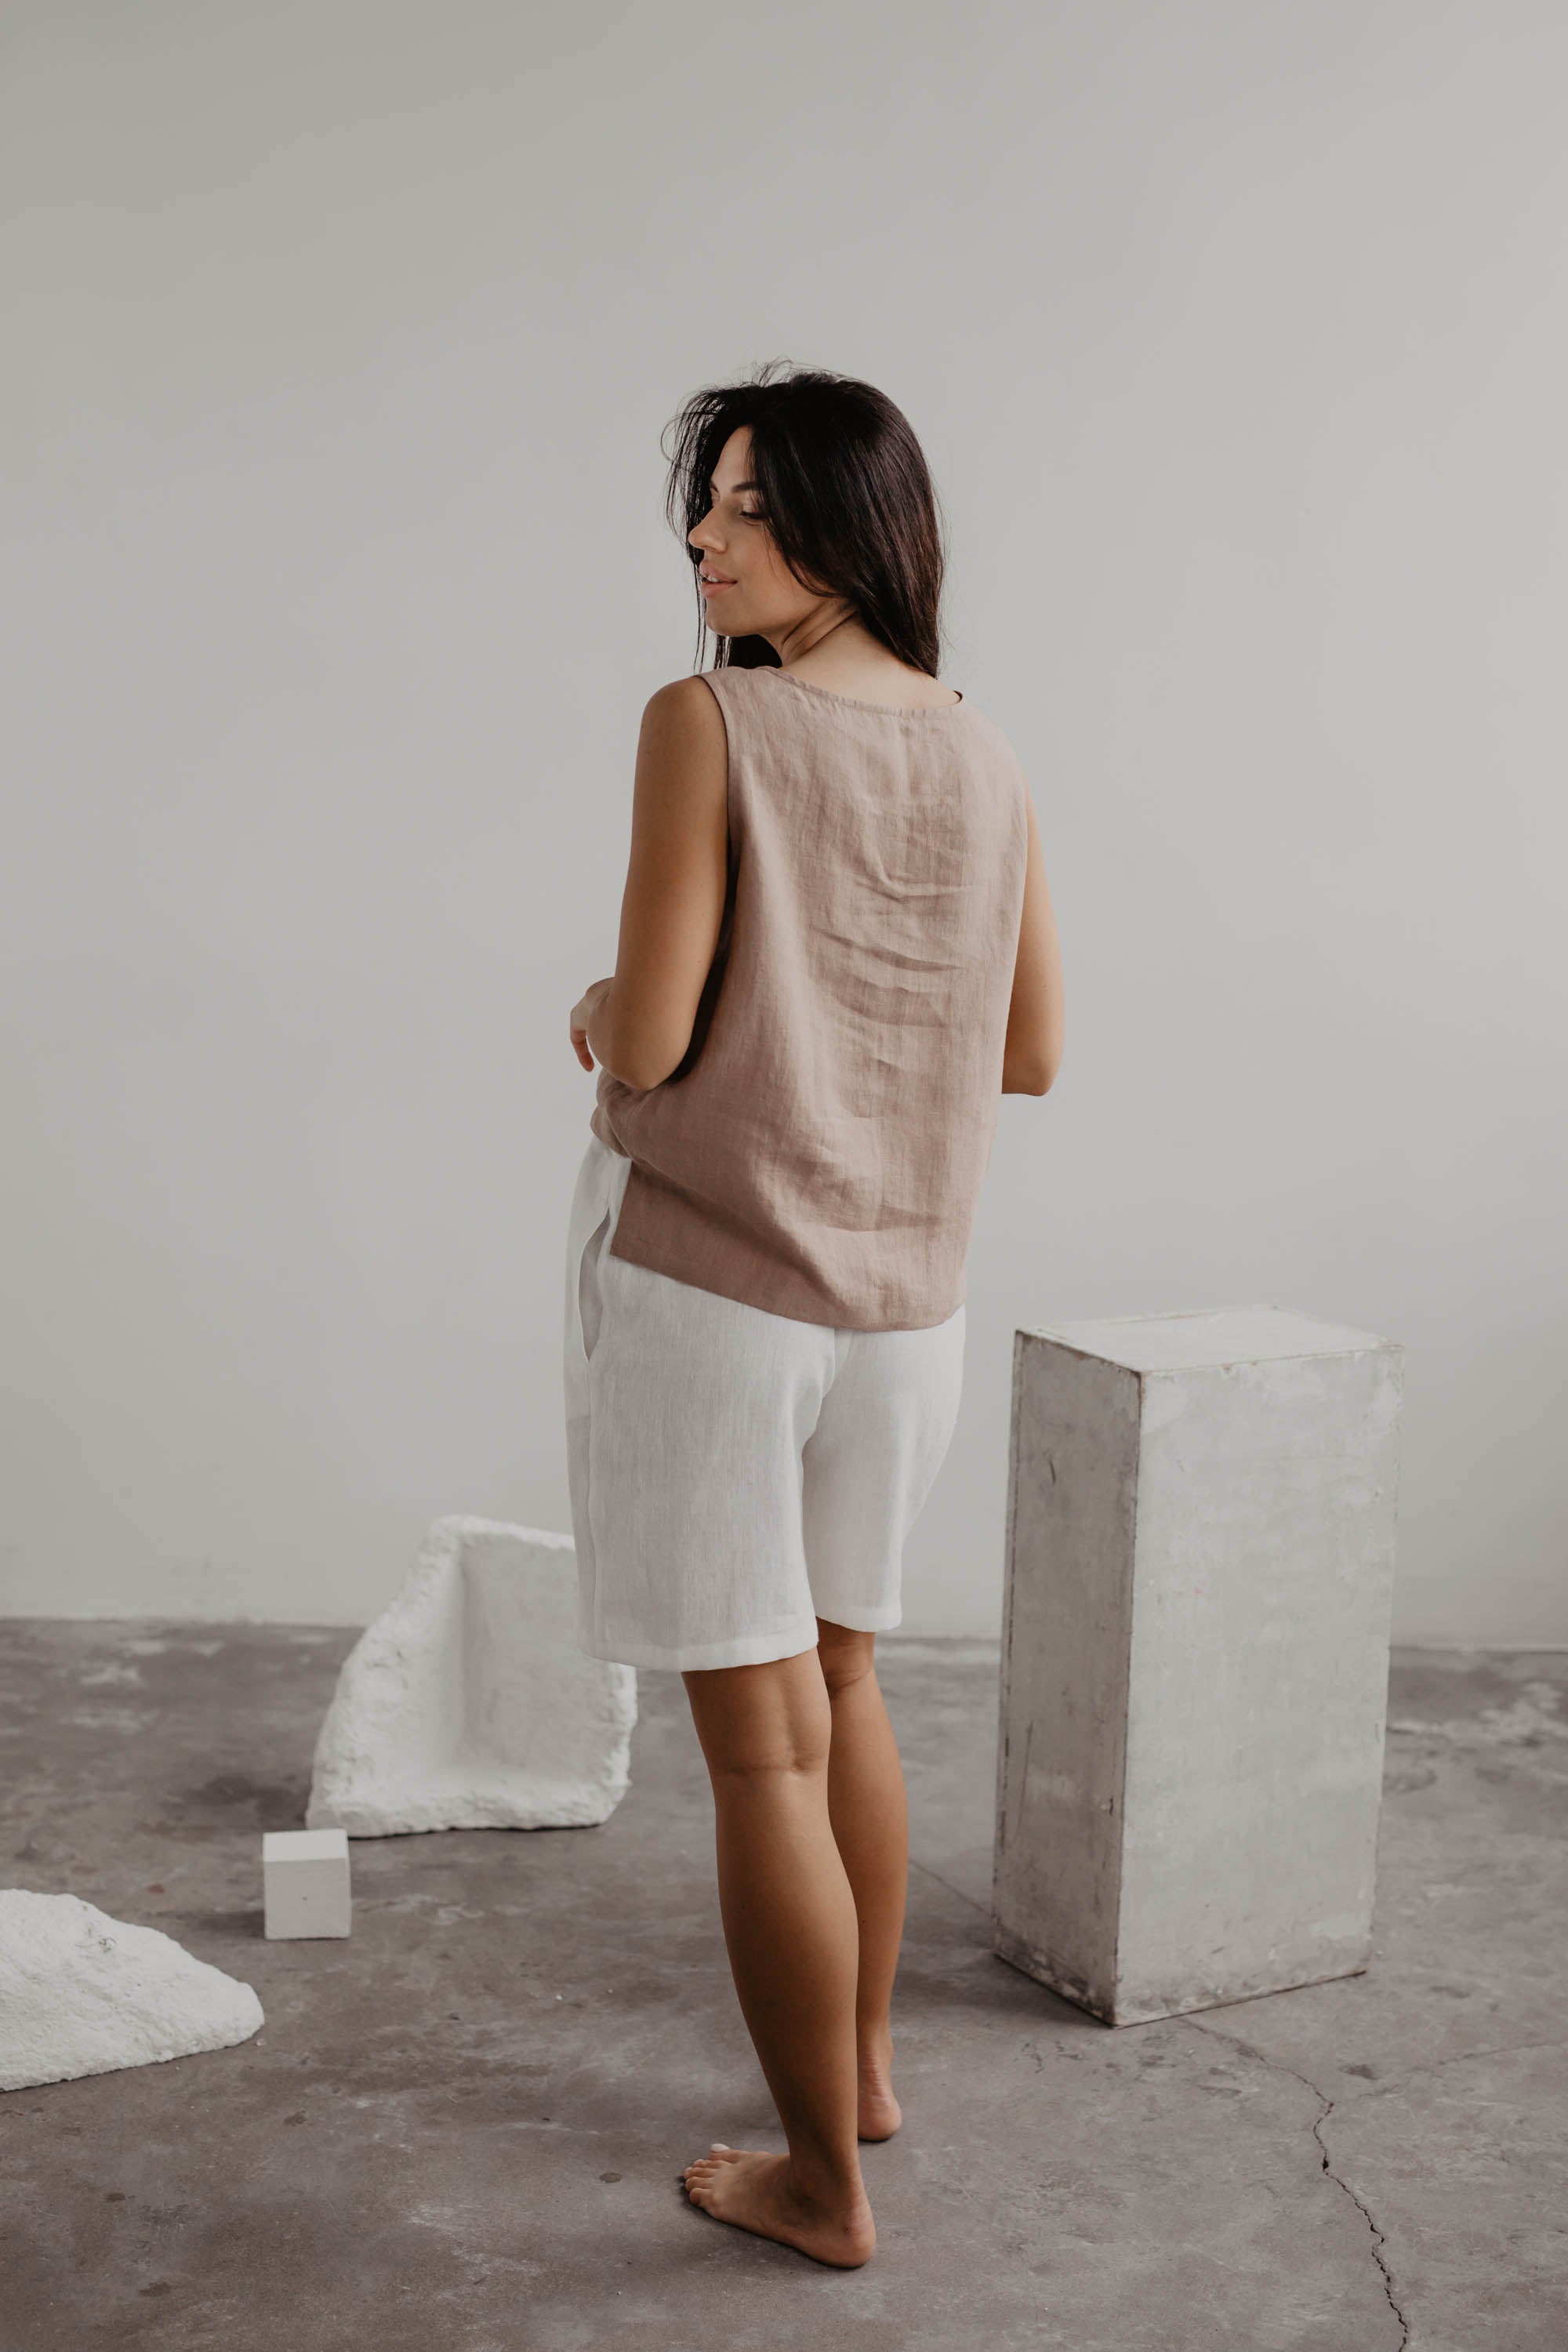 Back Of Woman Wearing A Dusty Rose Linen Top And White Linen Shorts